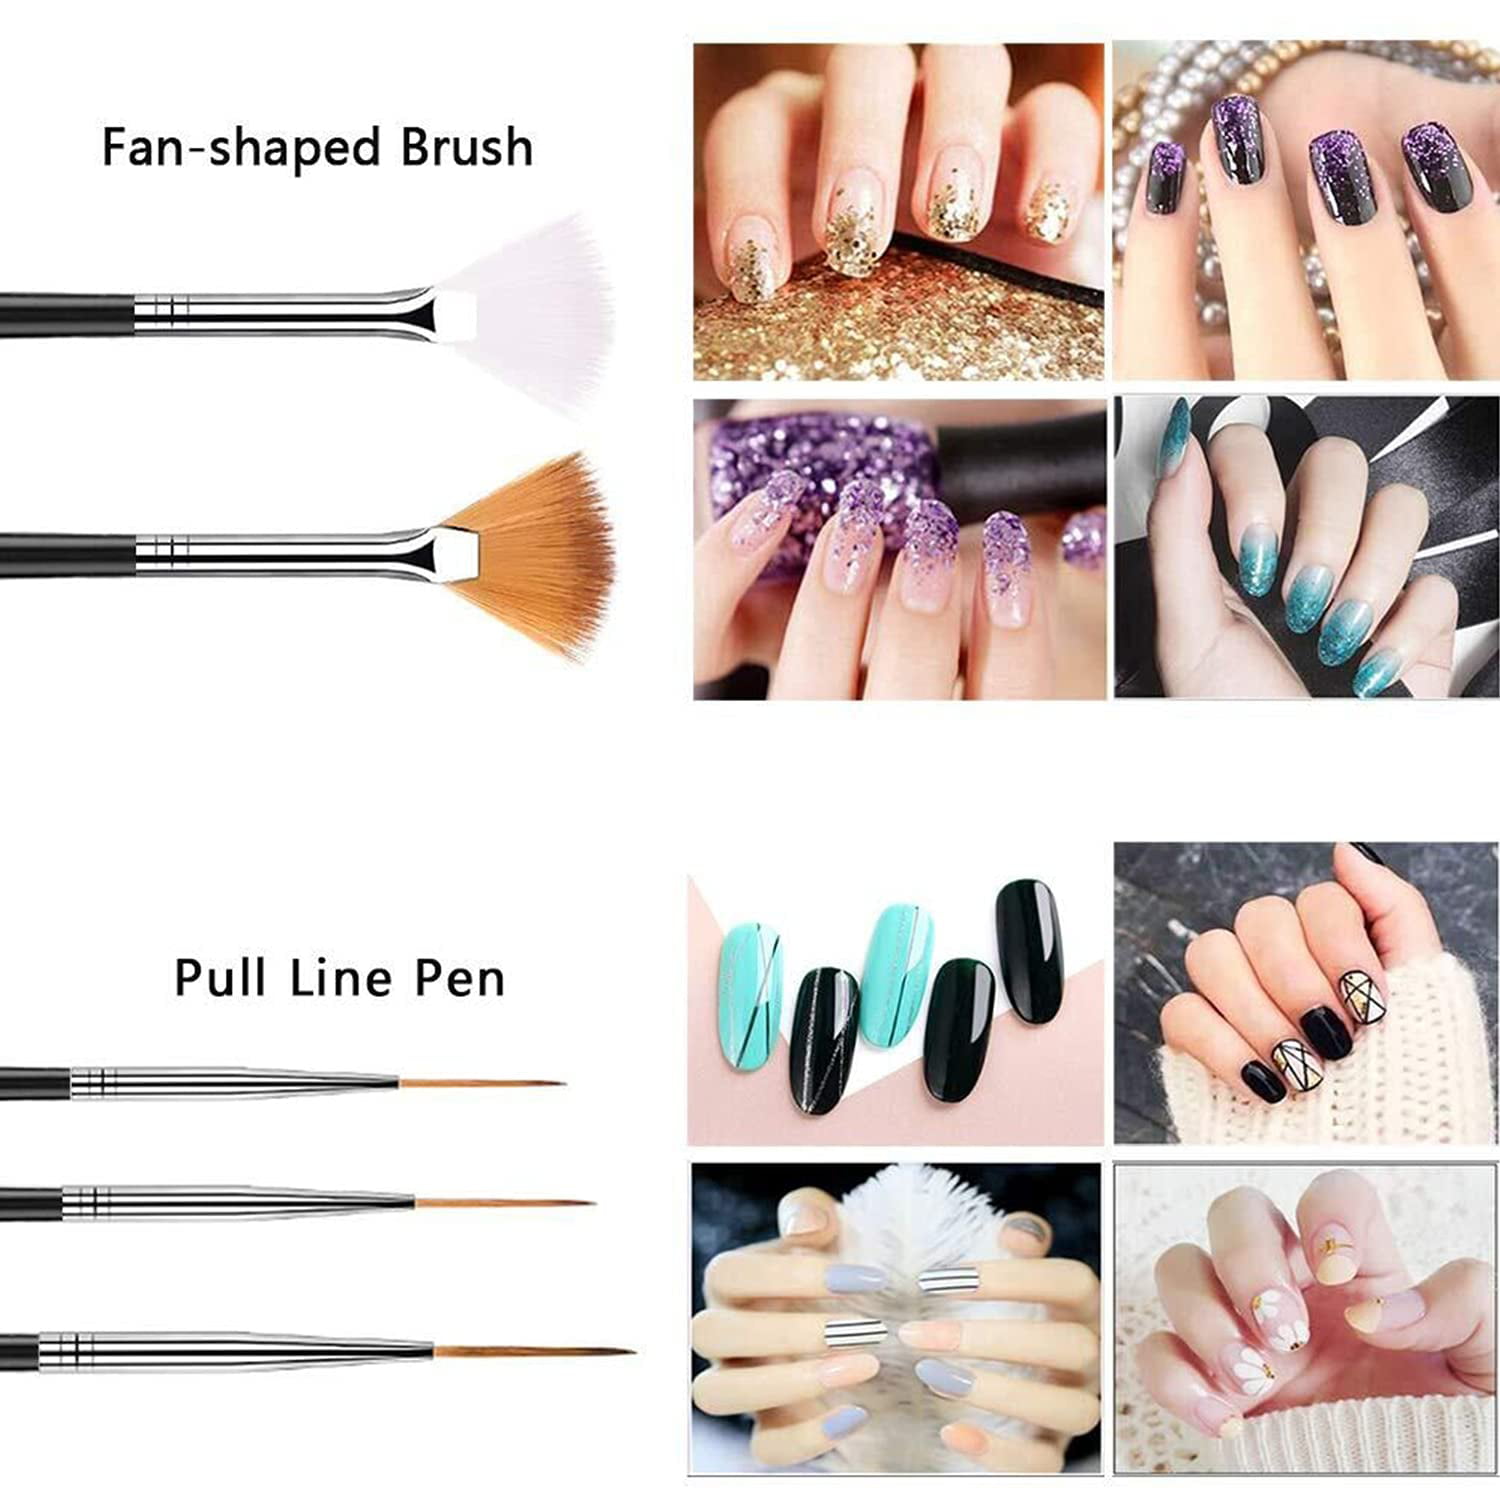 Nail Art Brushes -Nail Art Design Brushes for Gel Polish, Nail Art Liner  Brushes Nail Polish Brushes&Clean Up Brushes, Nail Dotter Tool 3D Nail Art  Decorations Brush for DIY Manicure Home Salon